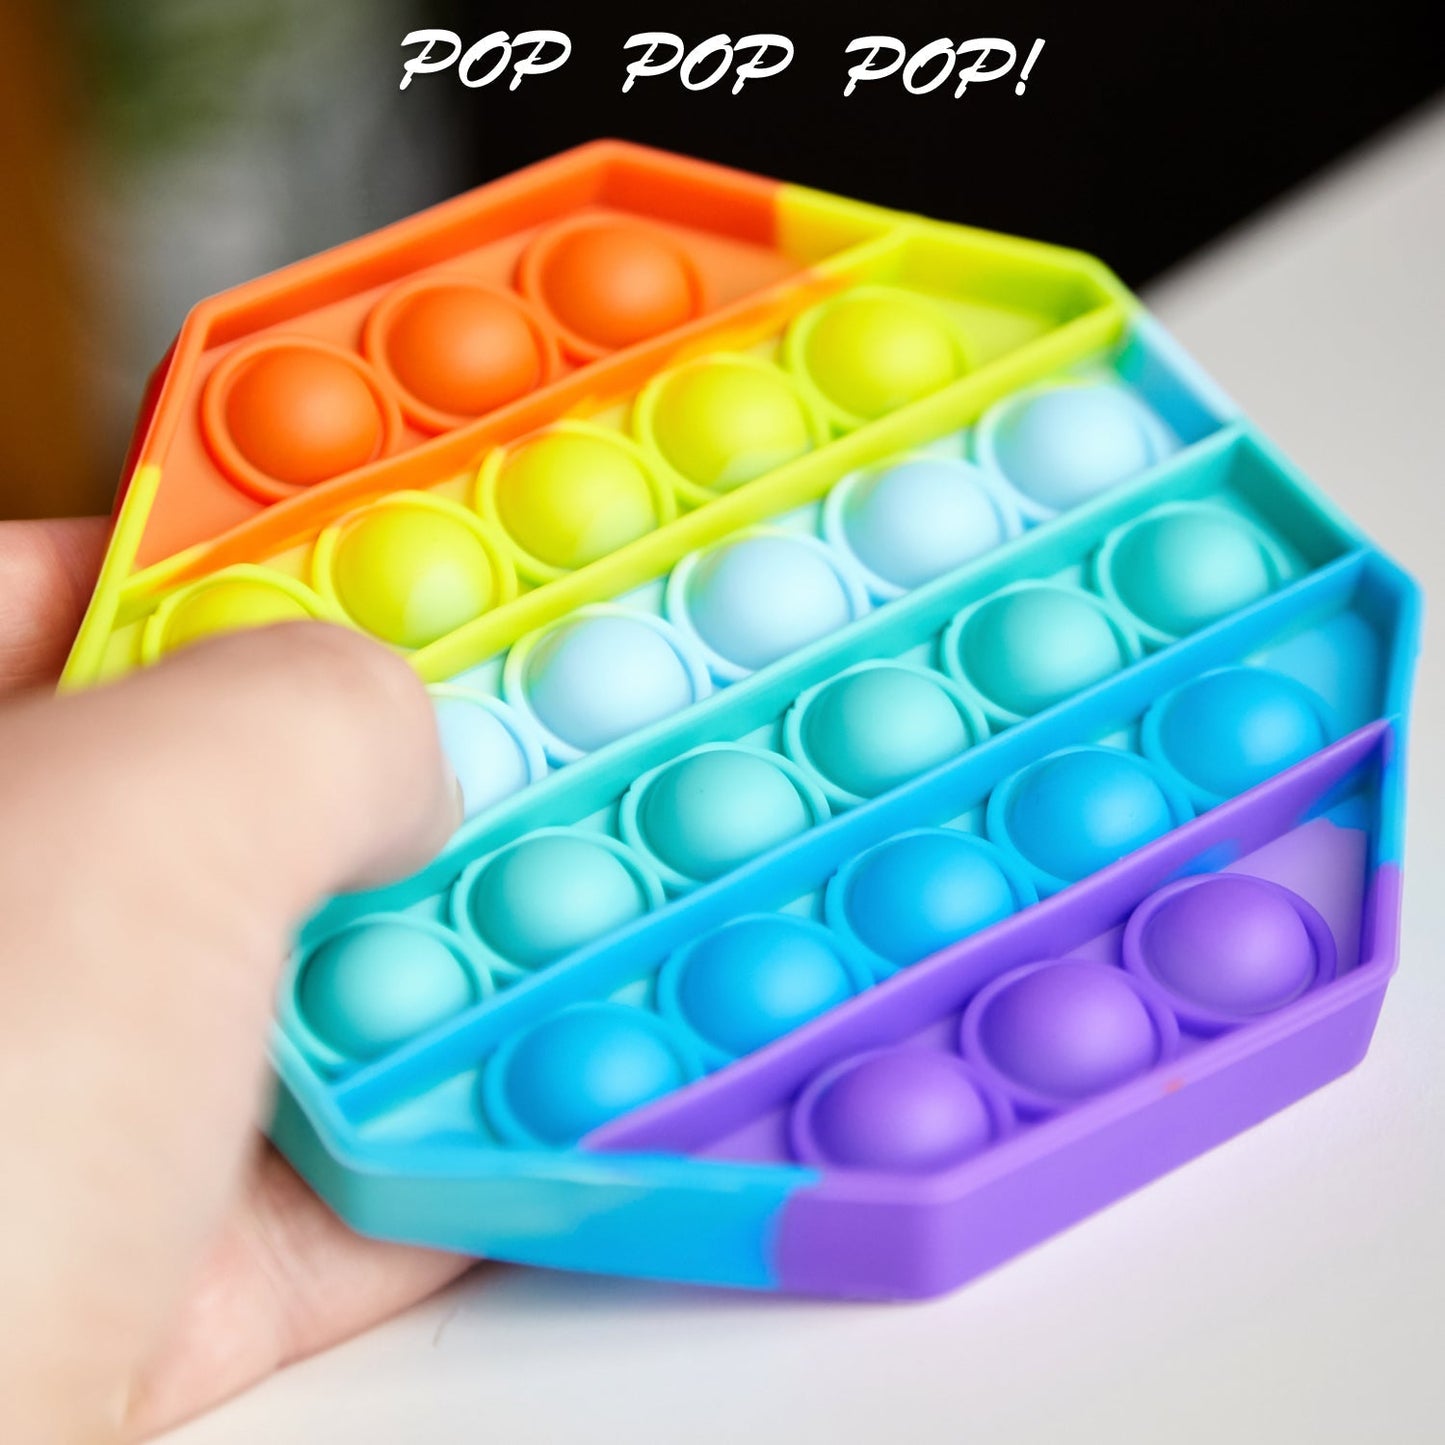 4475 Octagon Shape Silicone Push Bubbles Toy for Autism Push Toy for Kids Fidget Popping Sounds Toy DeoDap